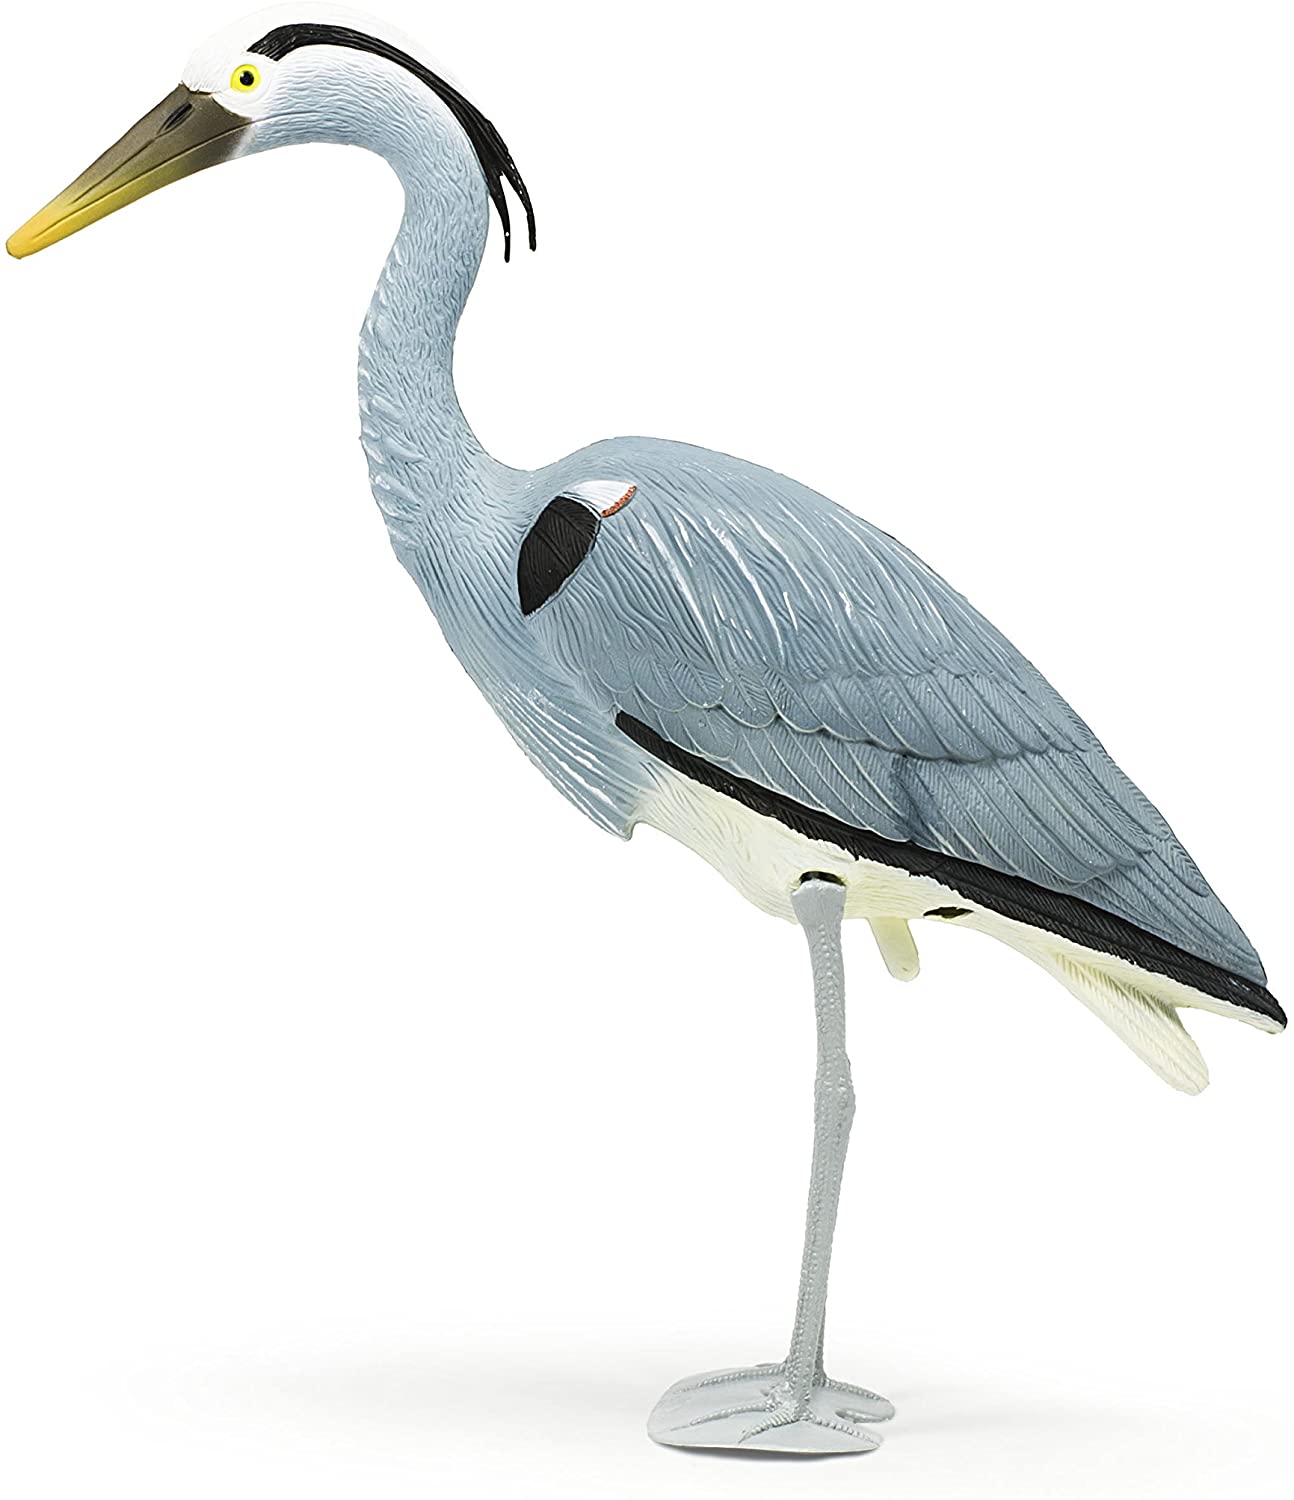 Blue Heron Bird Decoy for Pond, Waterfall, Landscape, and Garden Features - 30